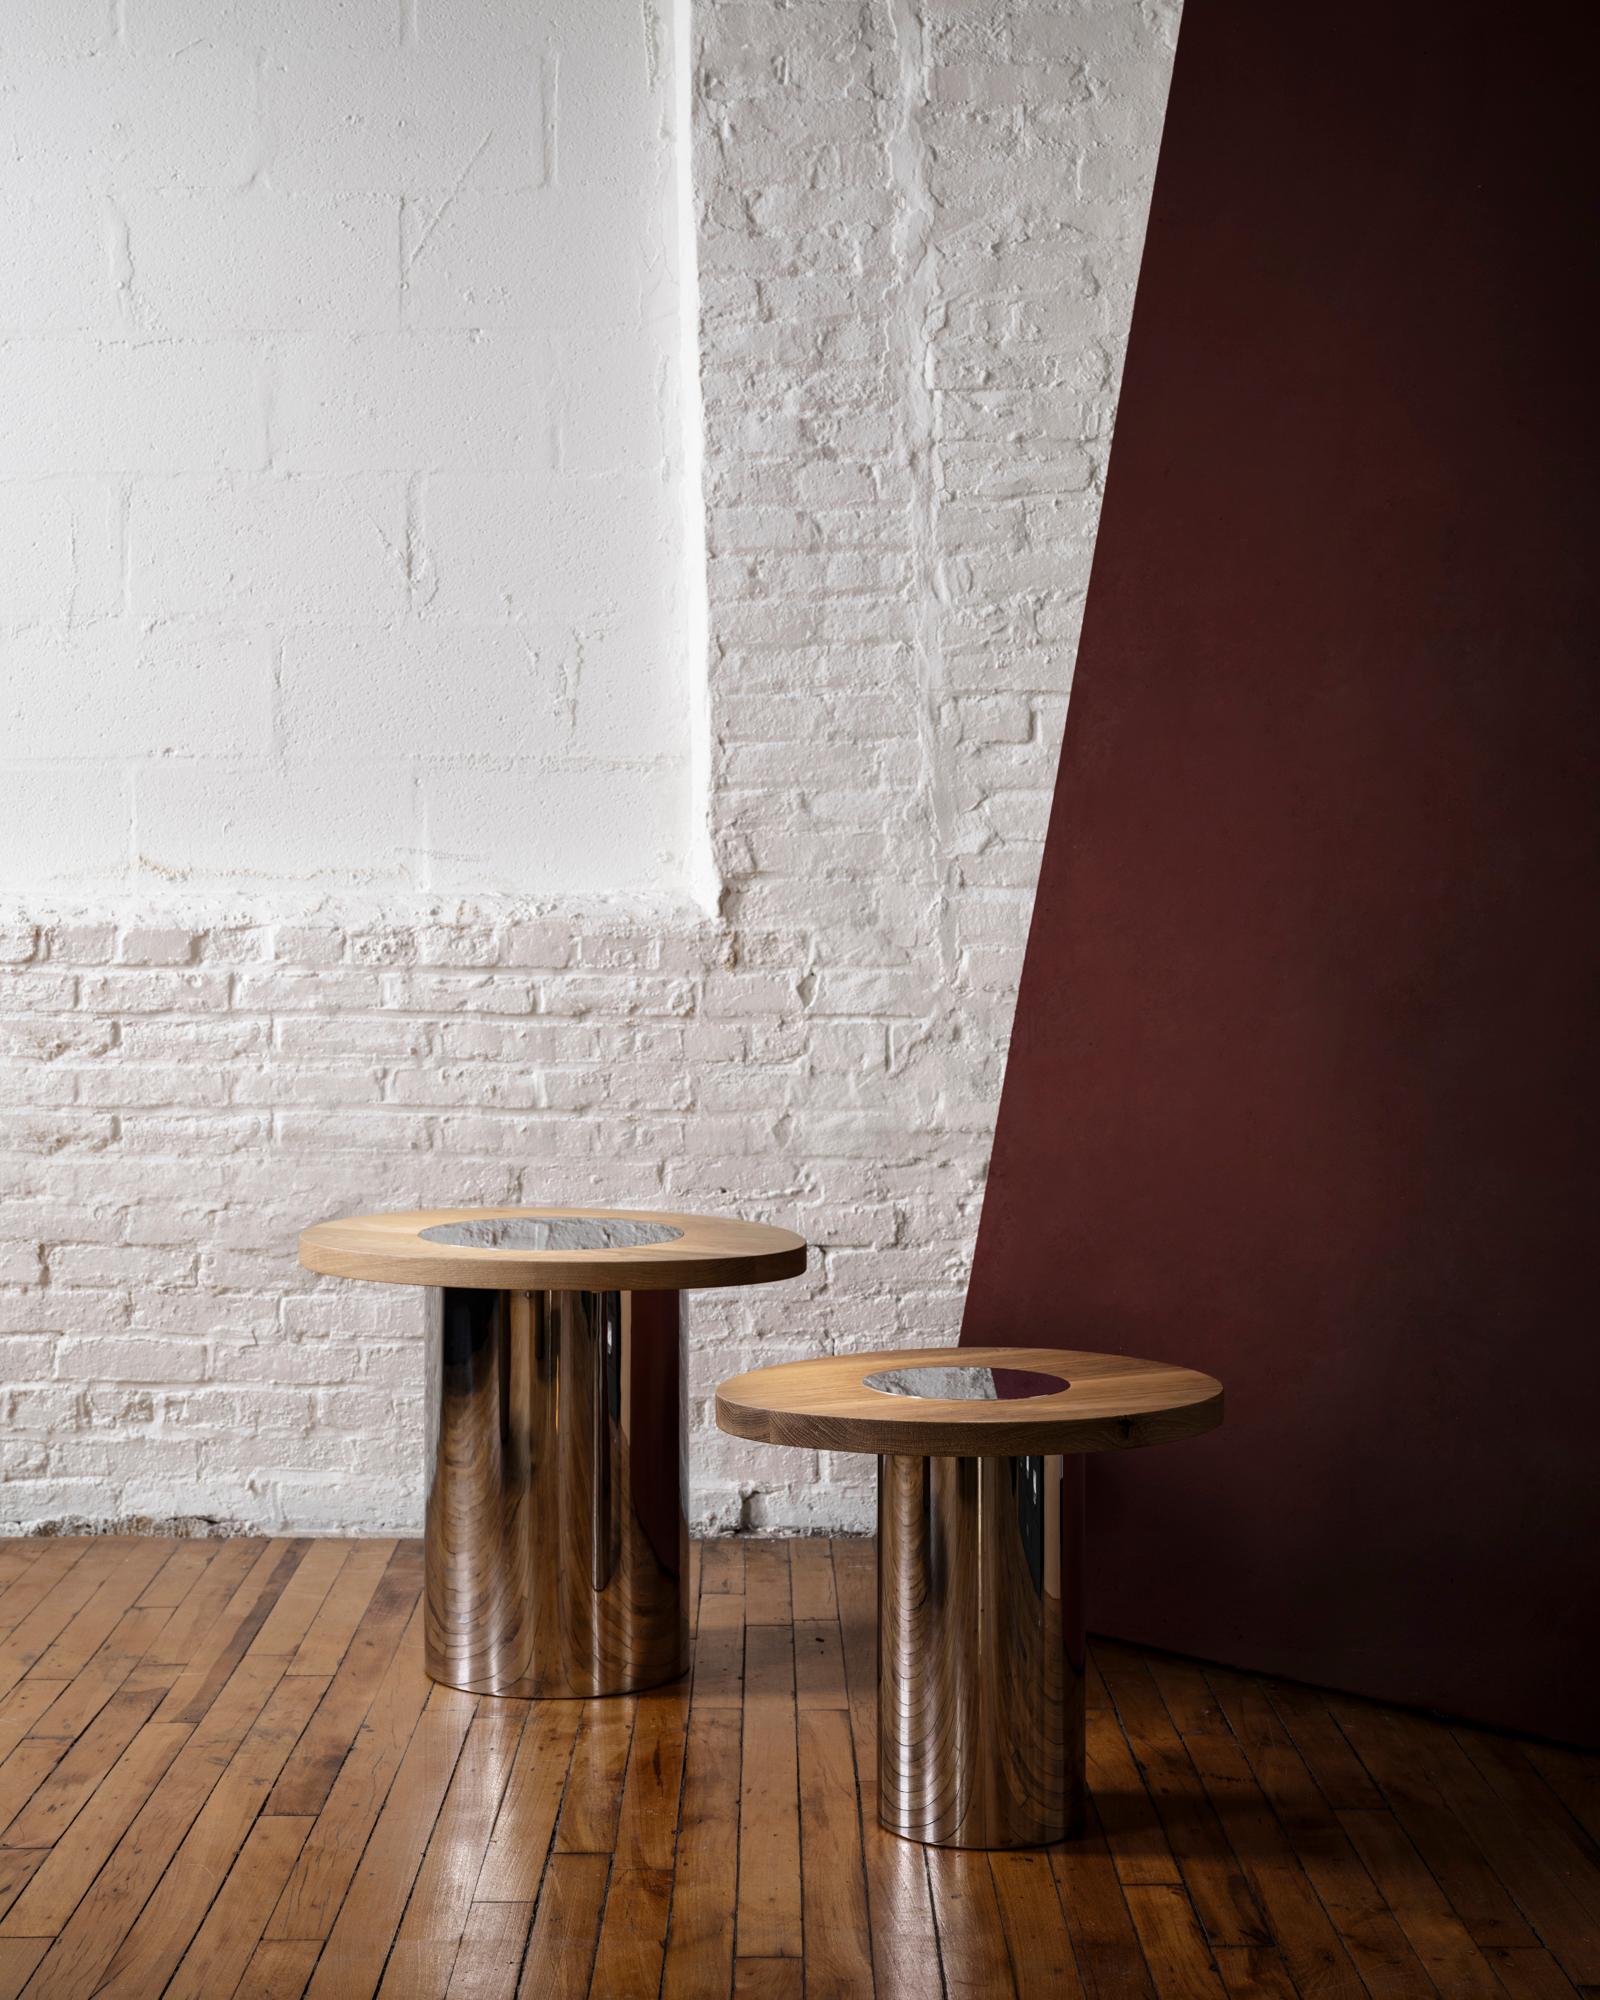 Inspired by the form and function of grain silos, the sculptural Silo Side Tables feature solid wood and hand-finished brass or stainless steel wrapped legs. Available in three sizes and height options to allow for various nesting